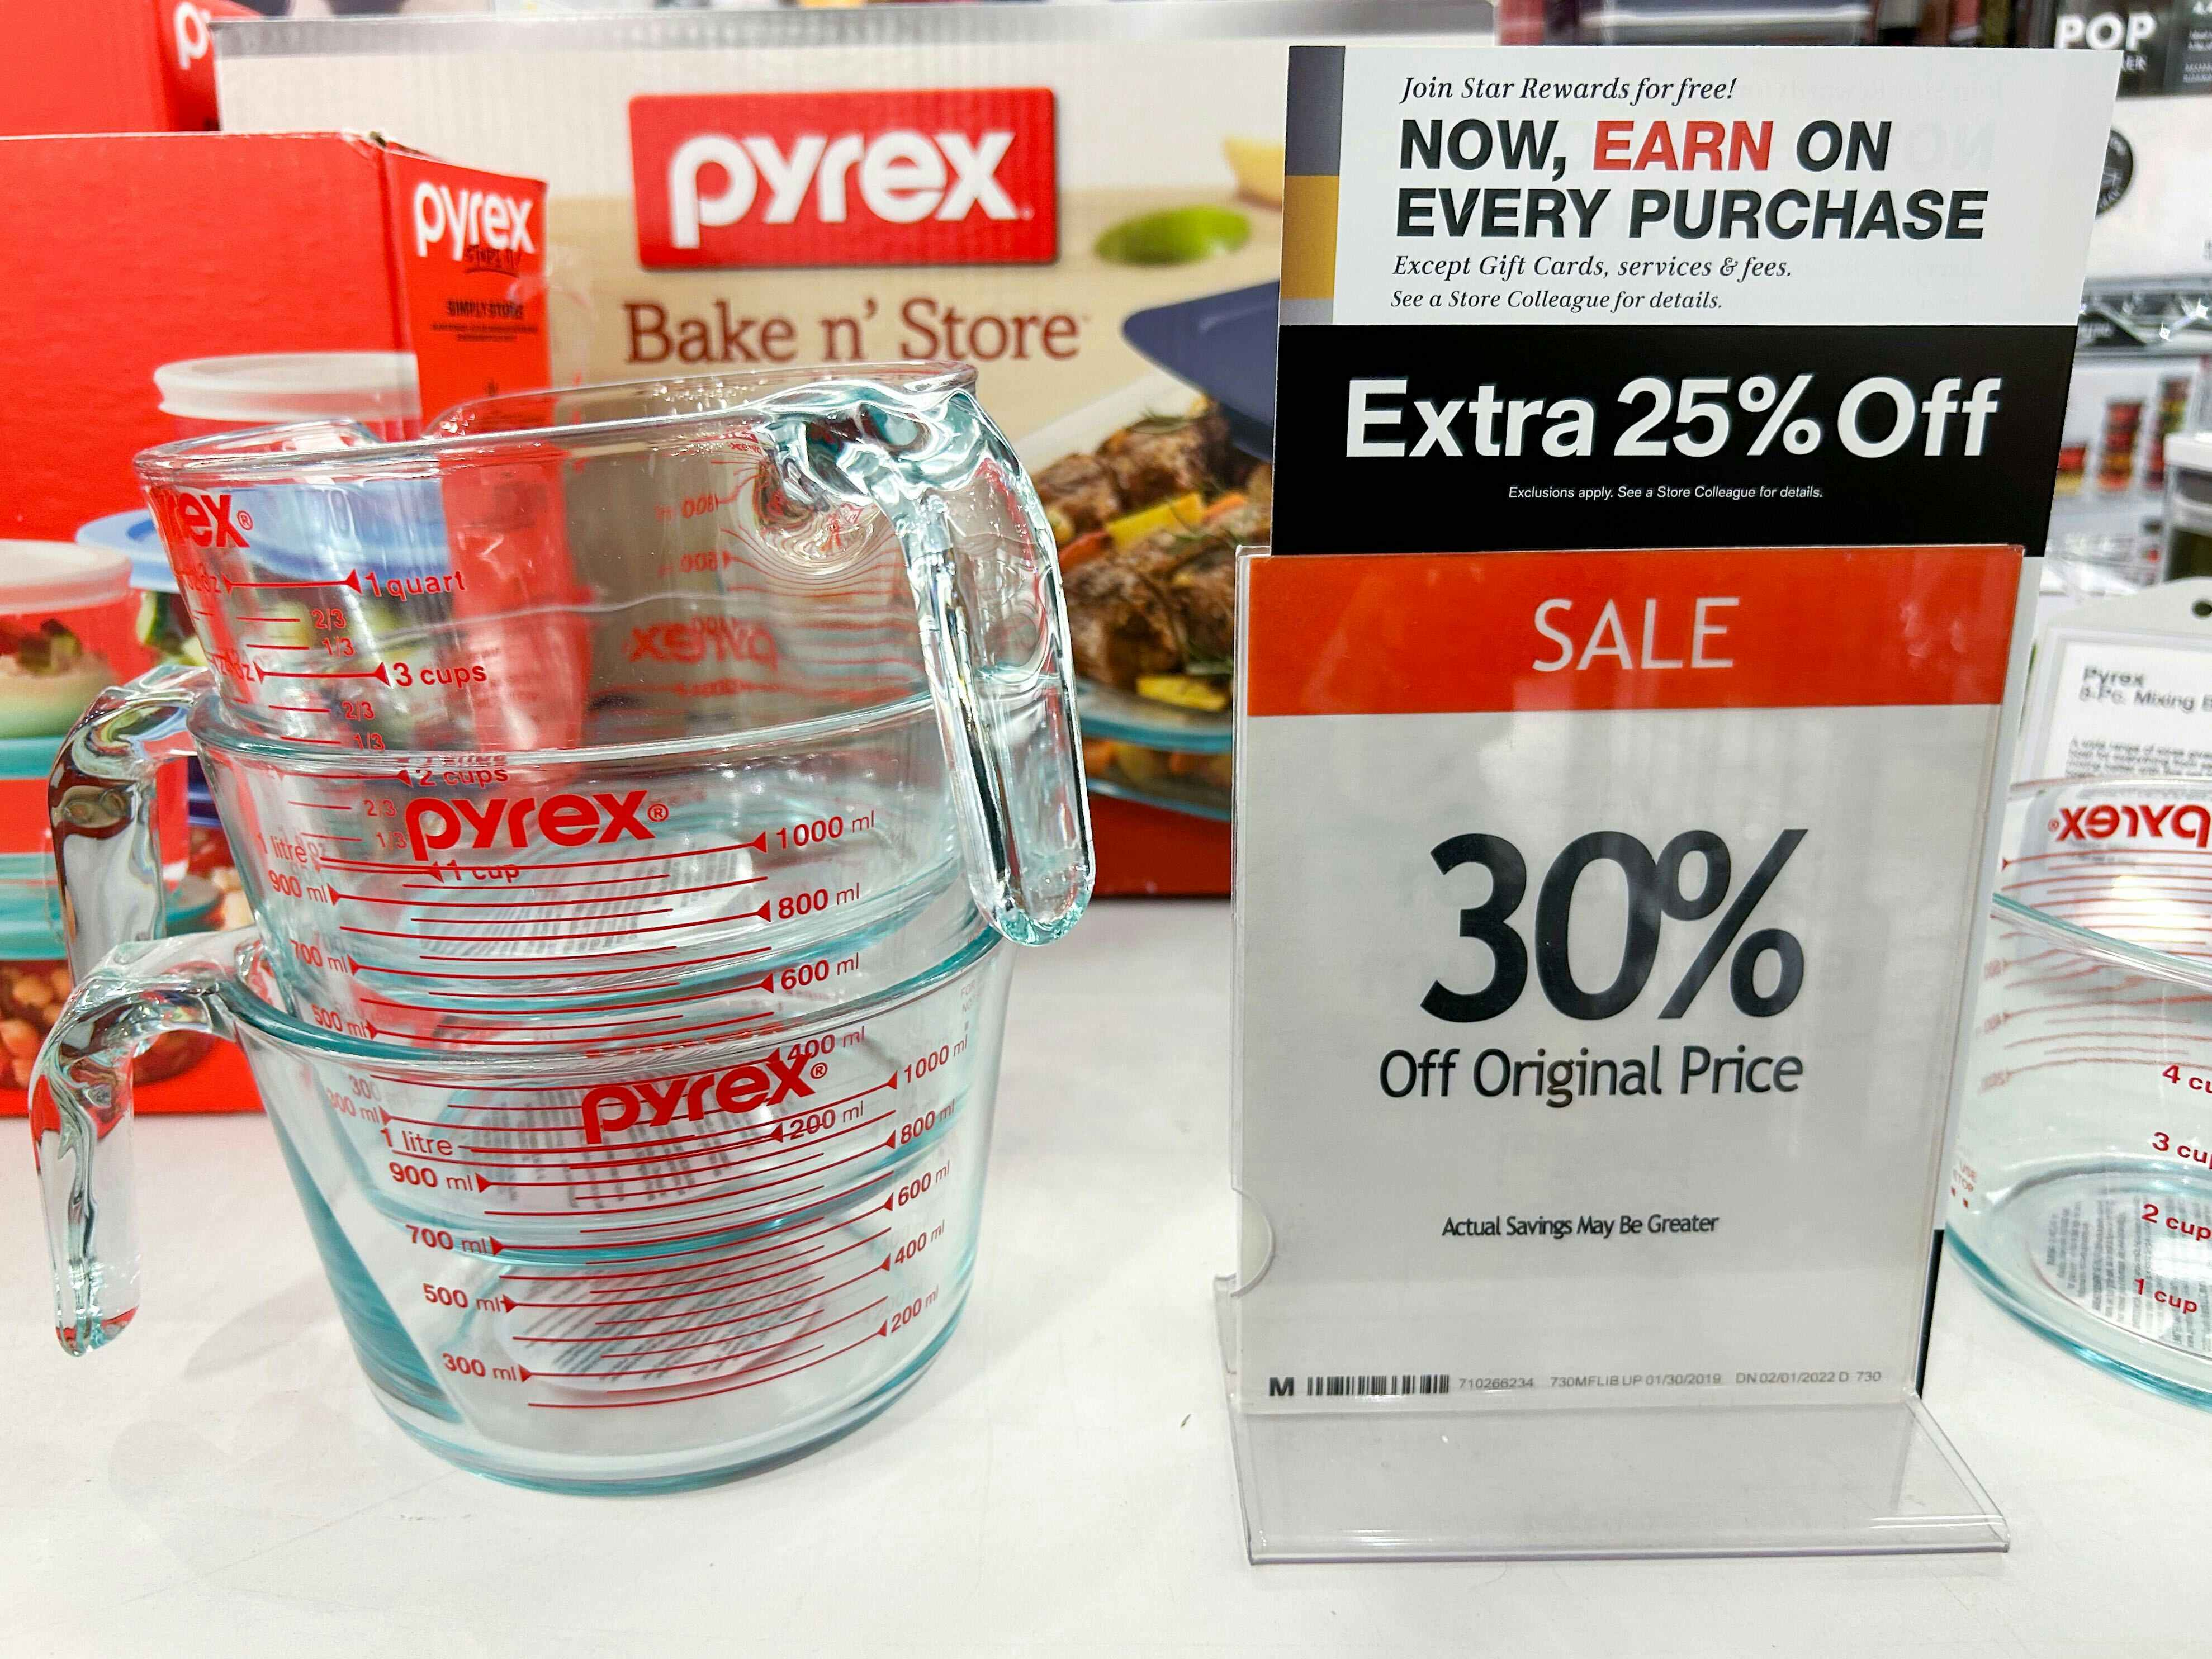 a pyrex measuring cup by a sale sign